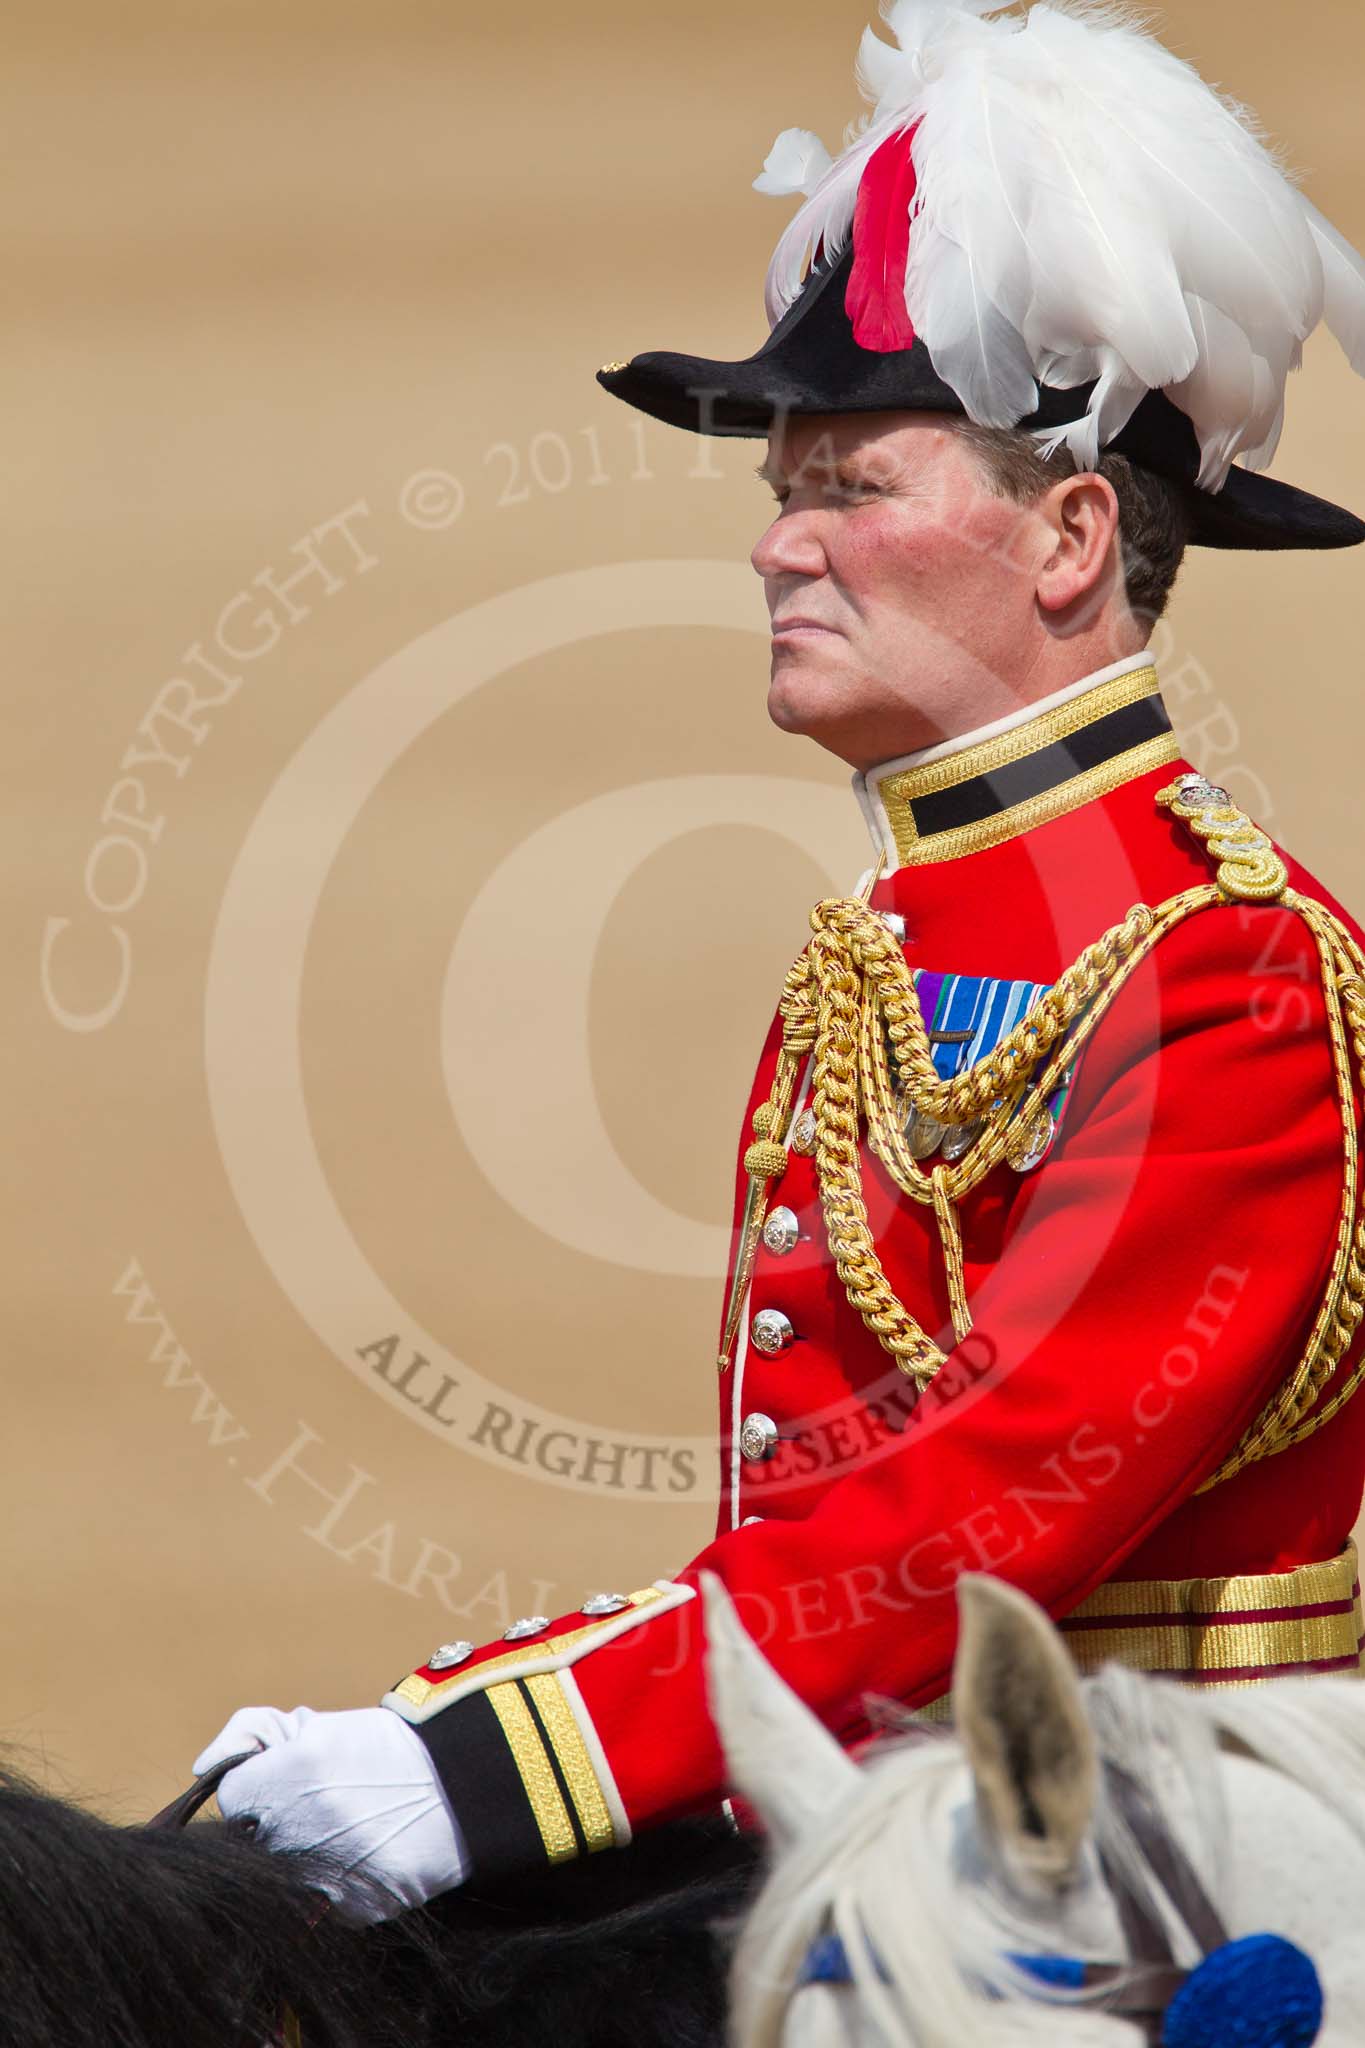 Trooping the Colour 2011: Close-up of Colonel Alastair Mathewson, the Chief of Staff of the Household Division Headquarters..
Horse Guards Parade, Westminster,
London SW1,
Greater London,
United Kingdom,
on 11 June 2011 at 11:02, image #151